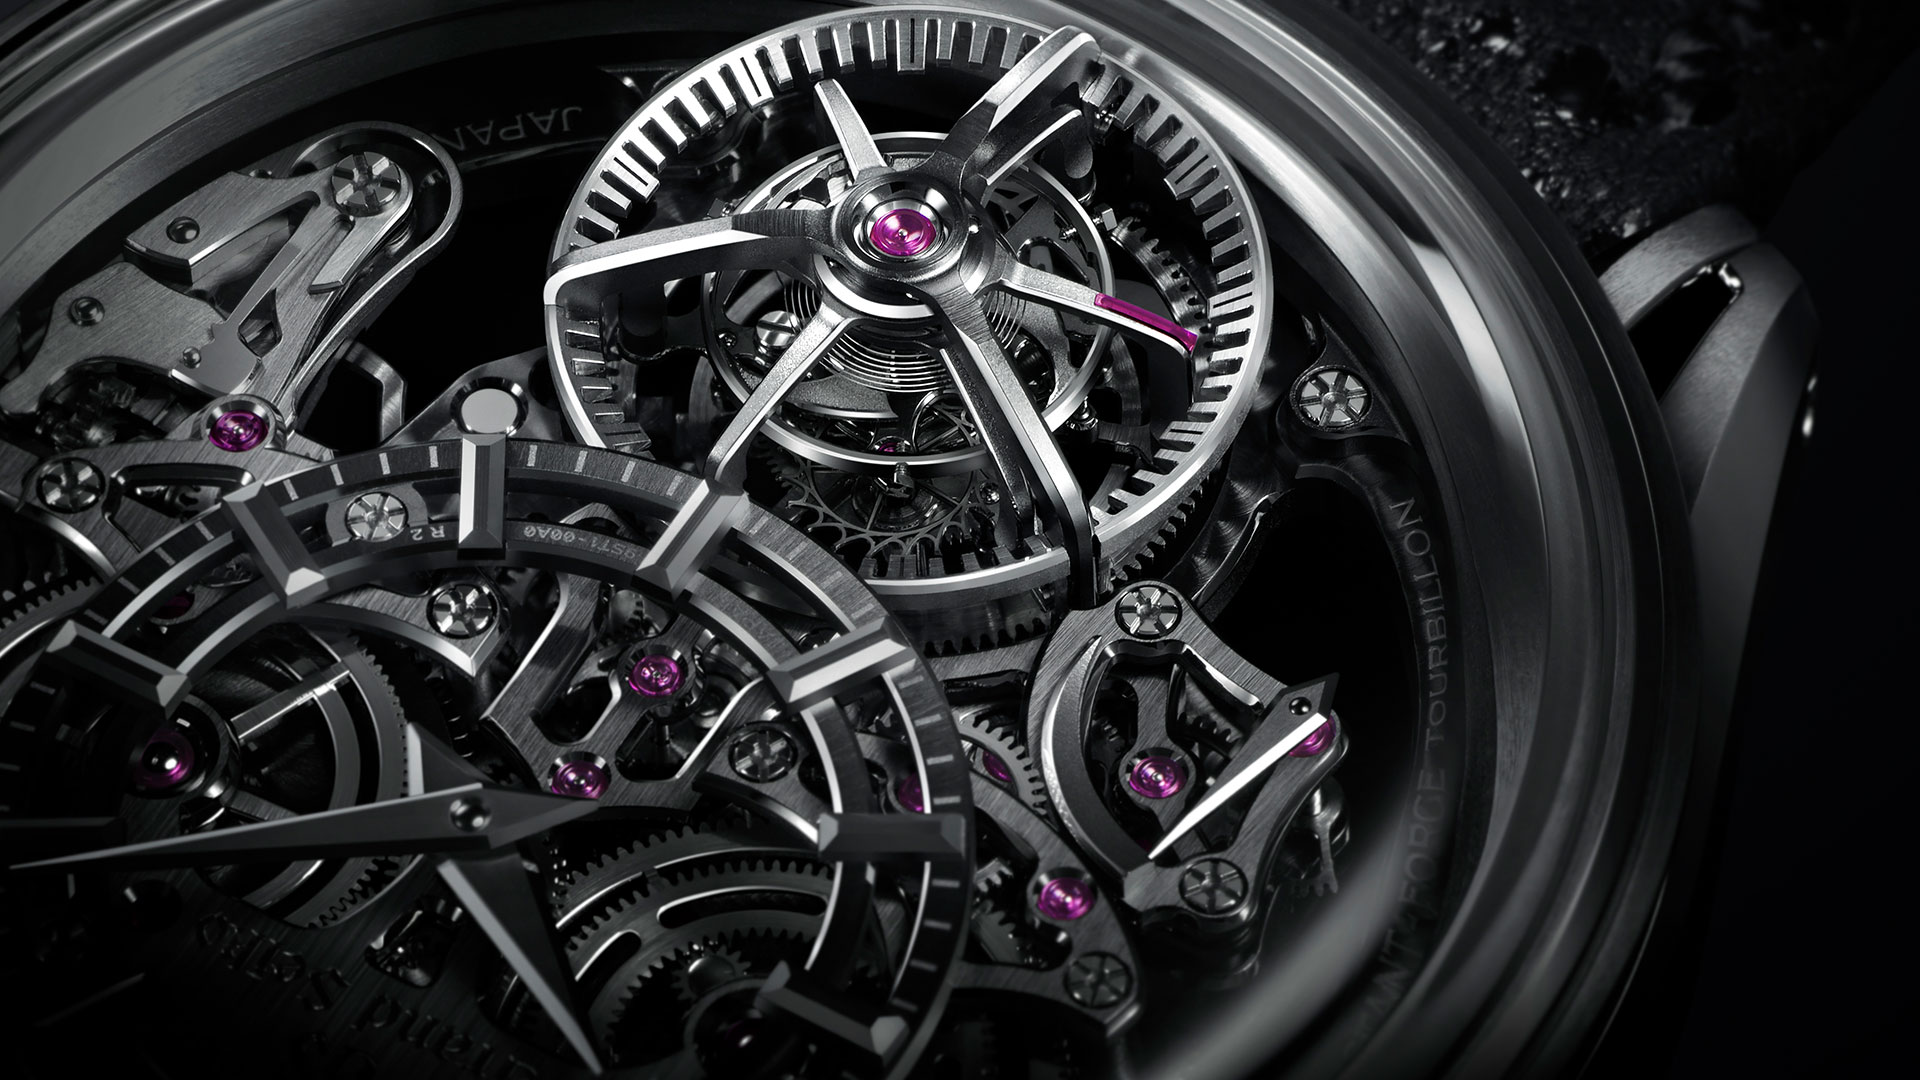 This Might Be the Most Complicated Watch Grand Seiko Has Ever Made